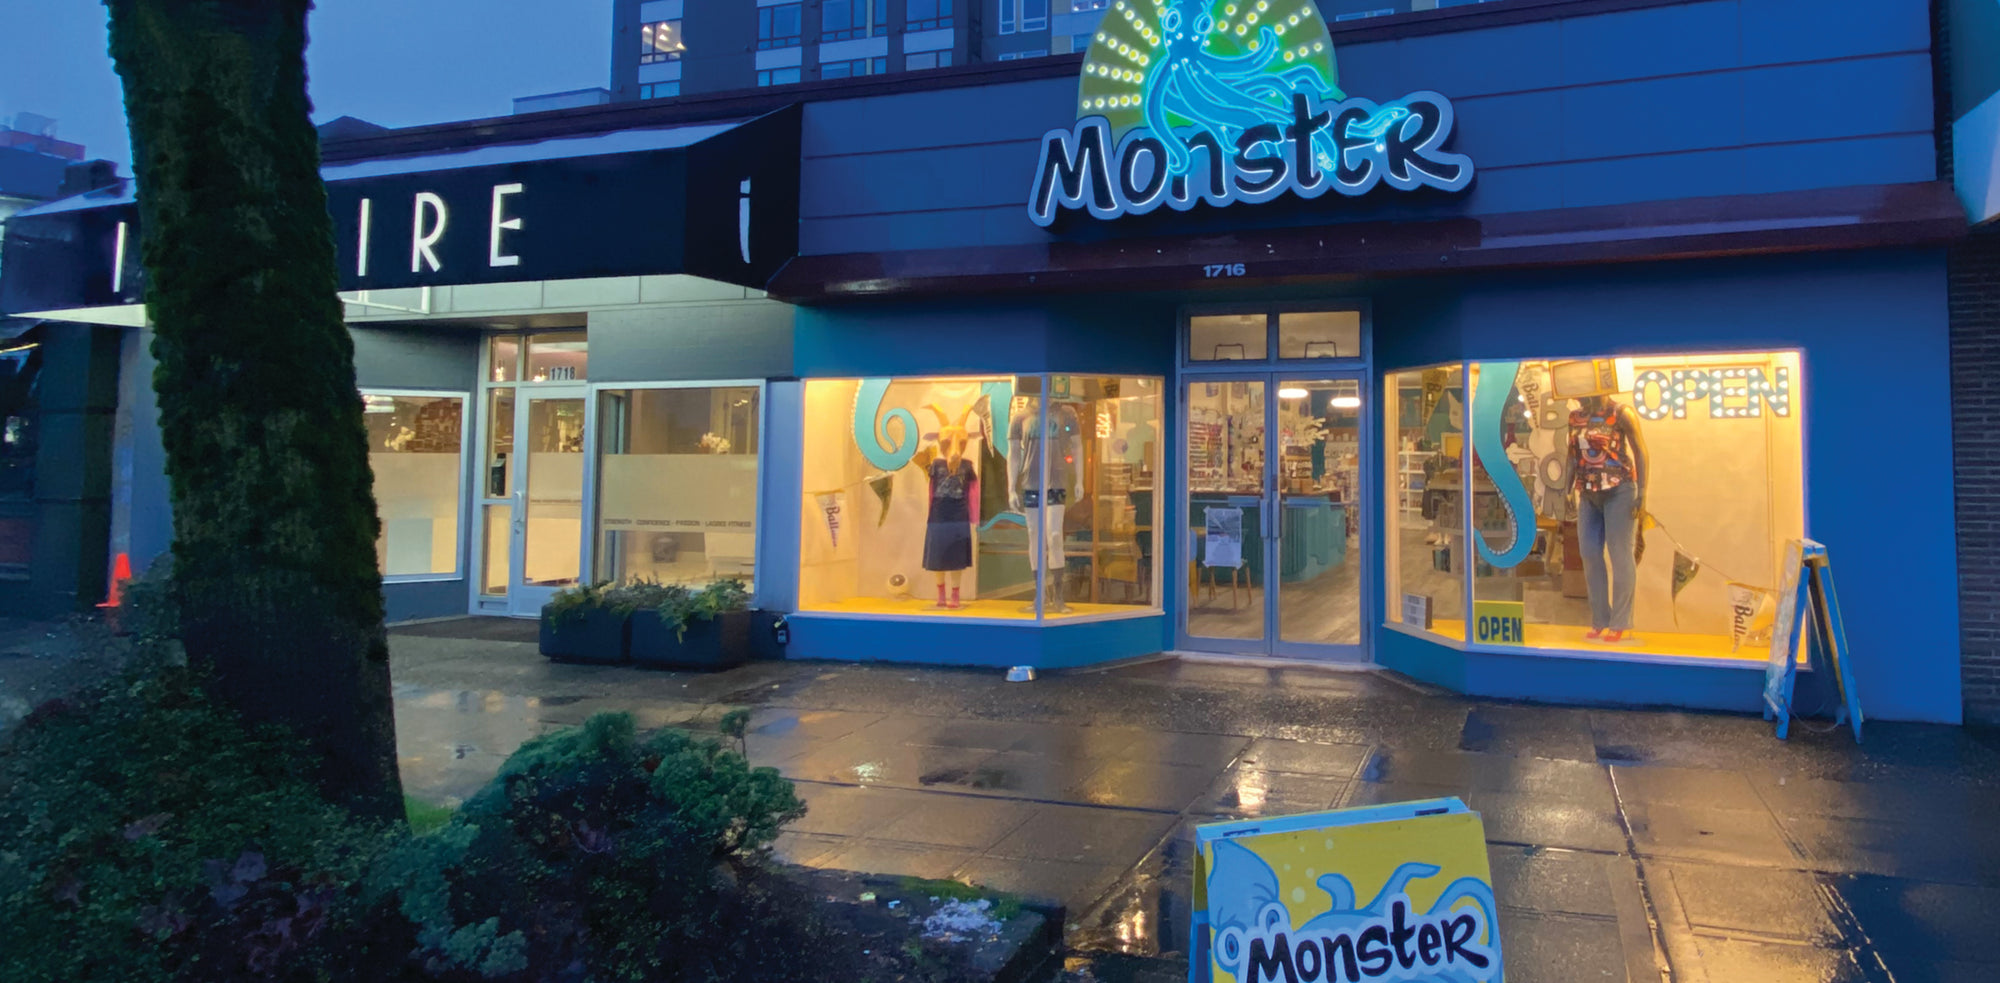 Exterior of Monster at dusk. The neon sign says "Monster" and has a friendly blue squid with sun beams behind it. The storefront is painted blue and tentacles reach down through the ceiling. 